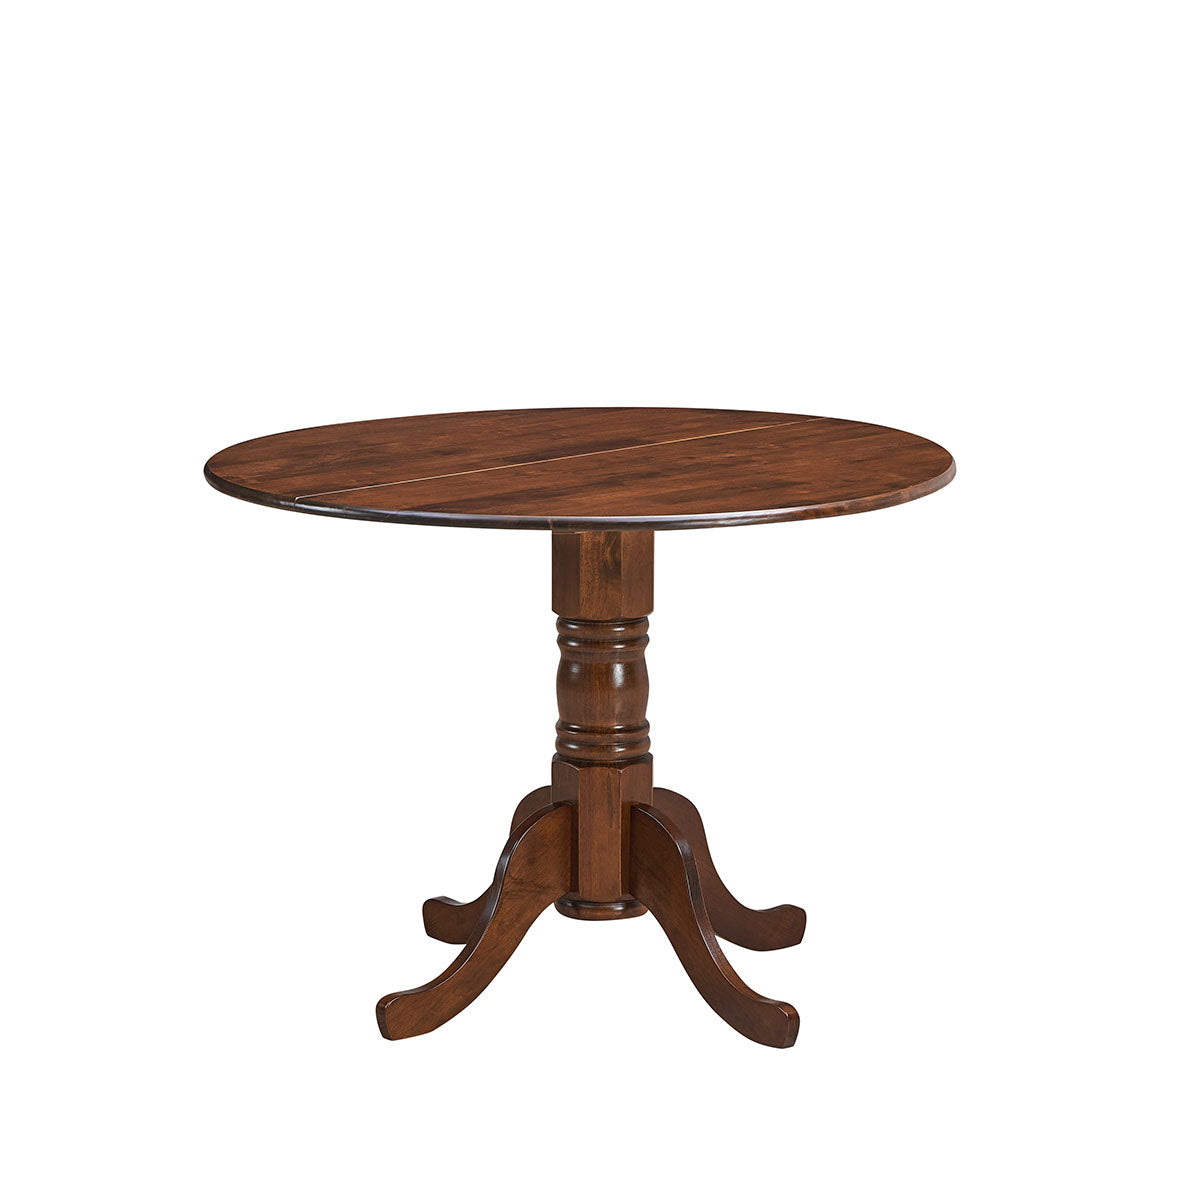 Giantex Wooden Dining Table, Dining Table with 40" D Round Tabletop & Curved Trestle Legs